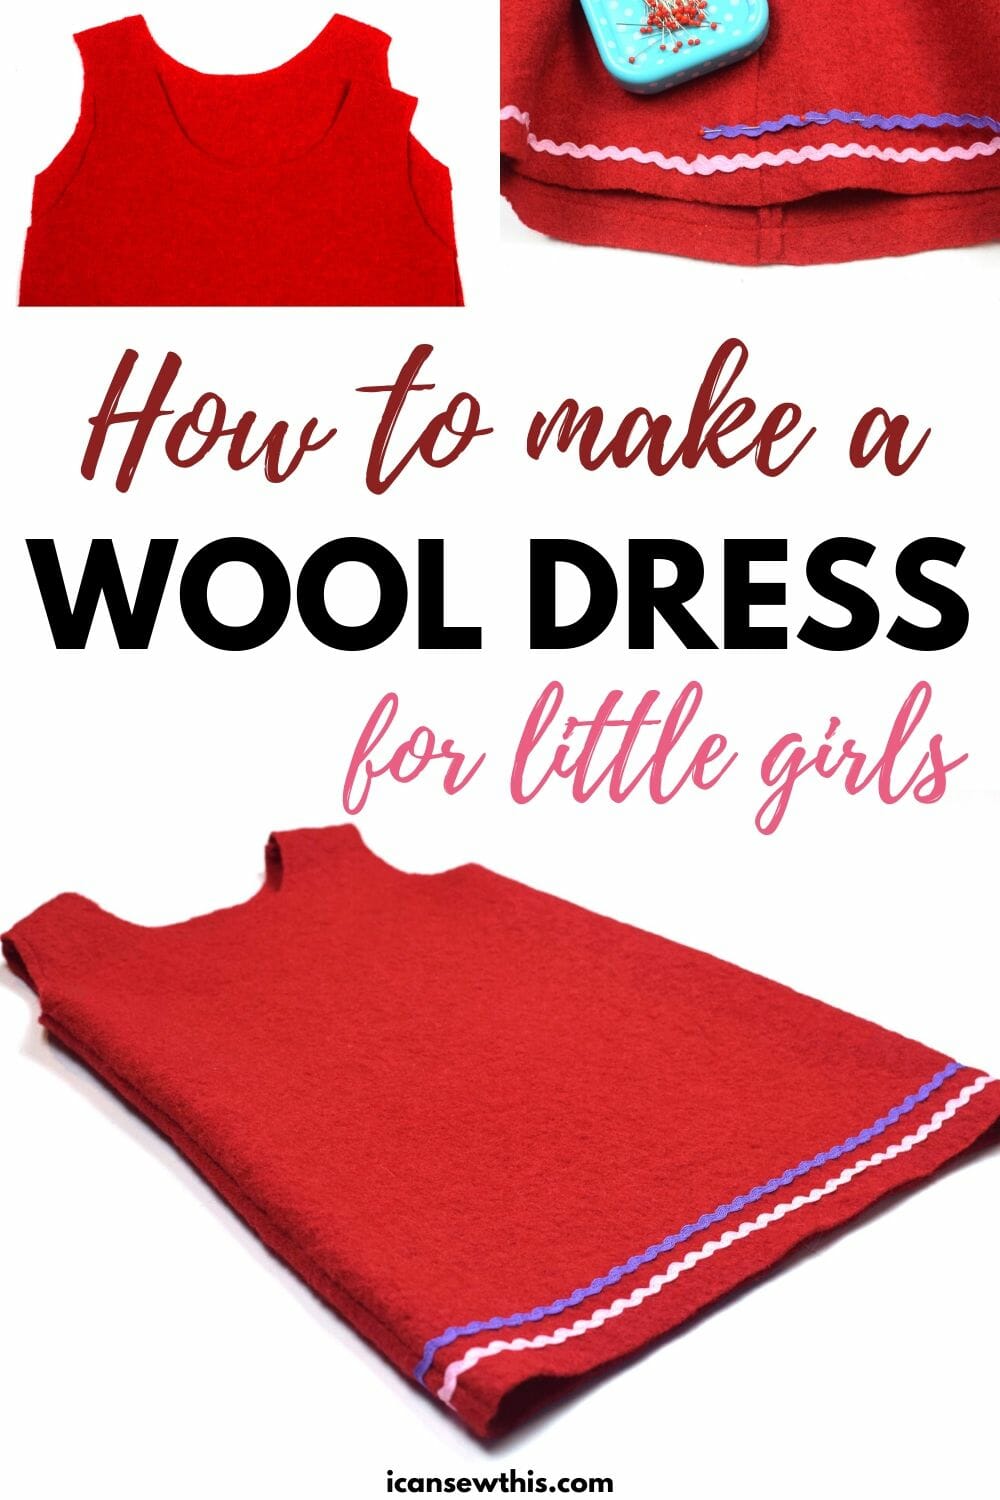 How to make a wool dress for little girls